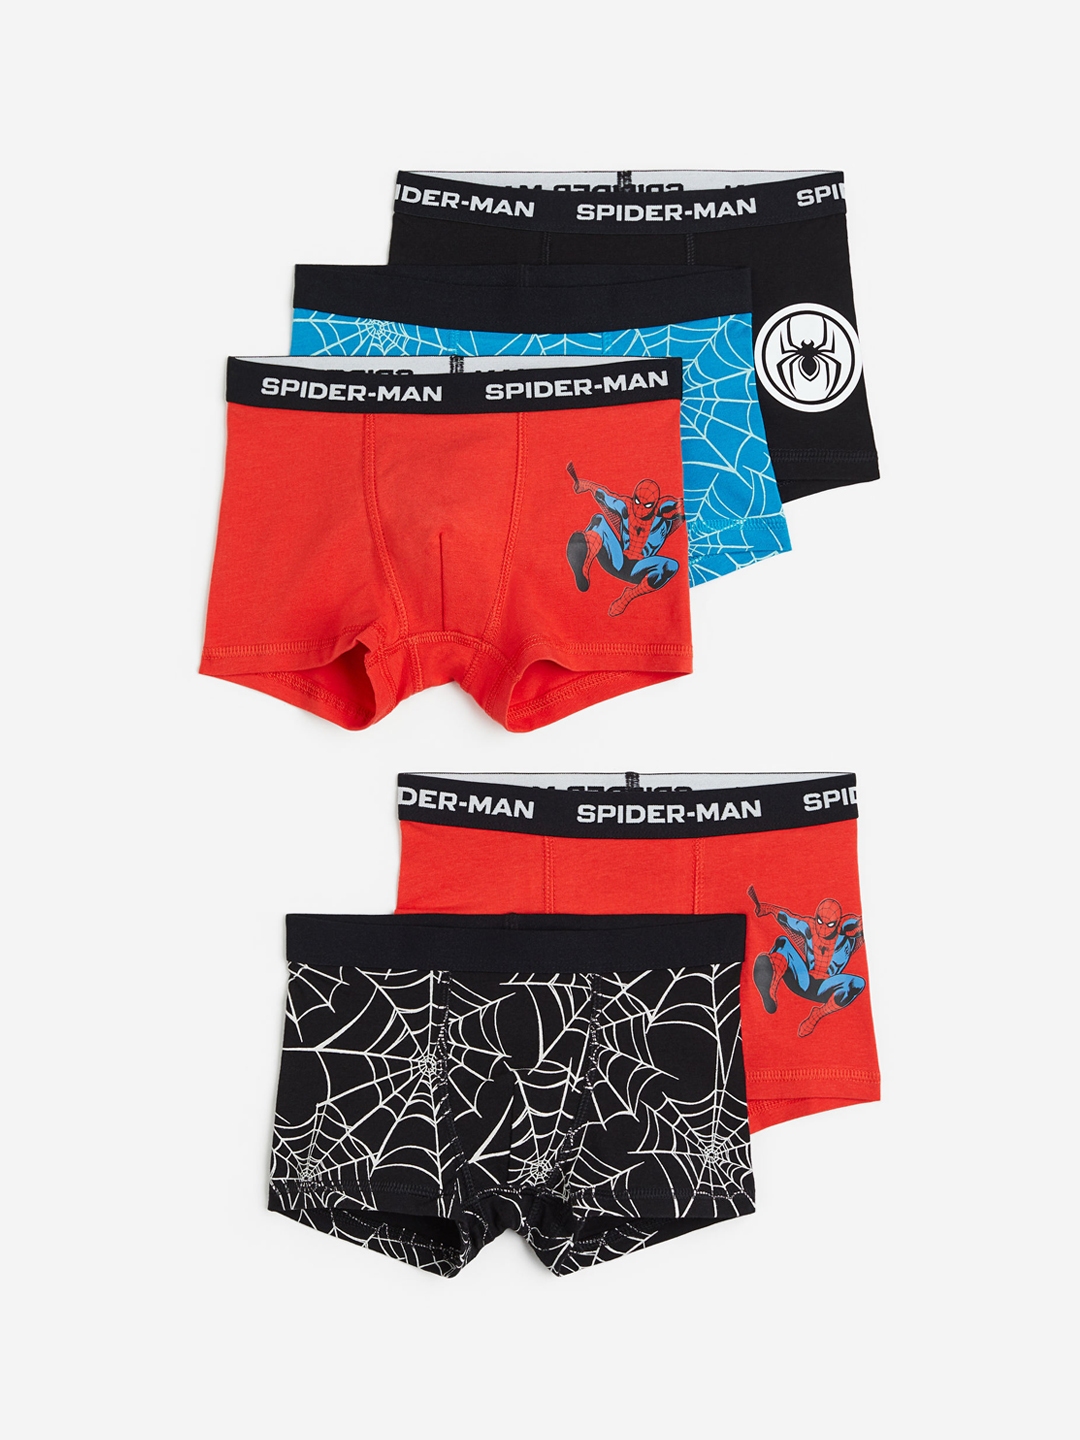 Buy H&M Boys 5 Pack Spider Man Boxer Shorts 1010215025 - Briefs for Boys  23721956